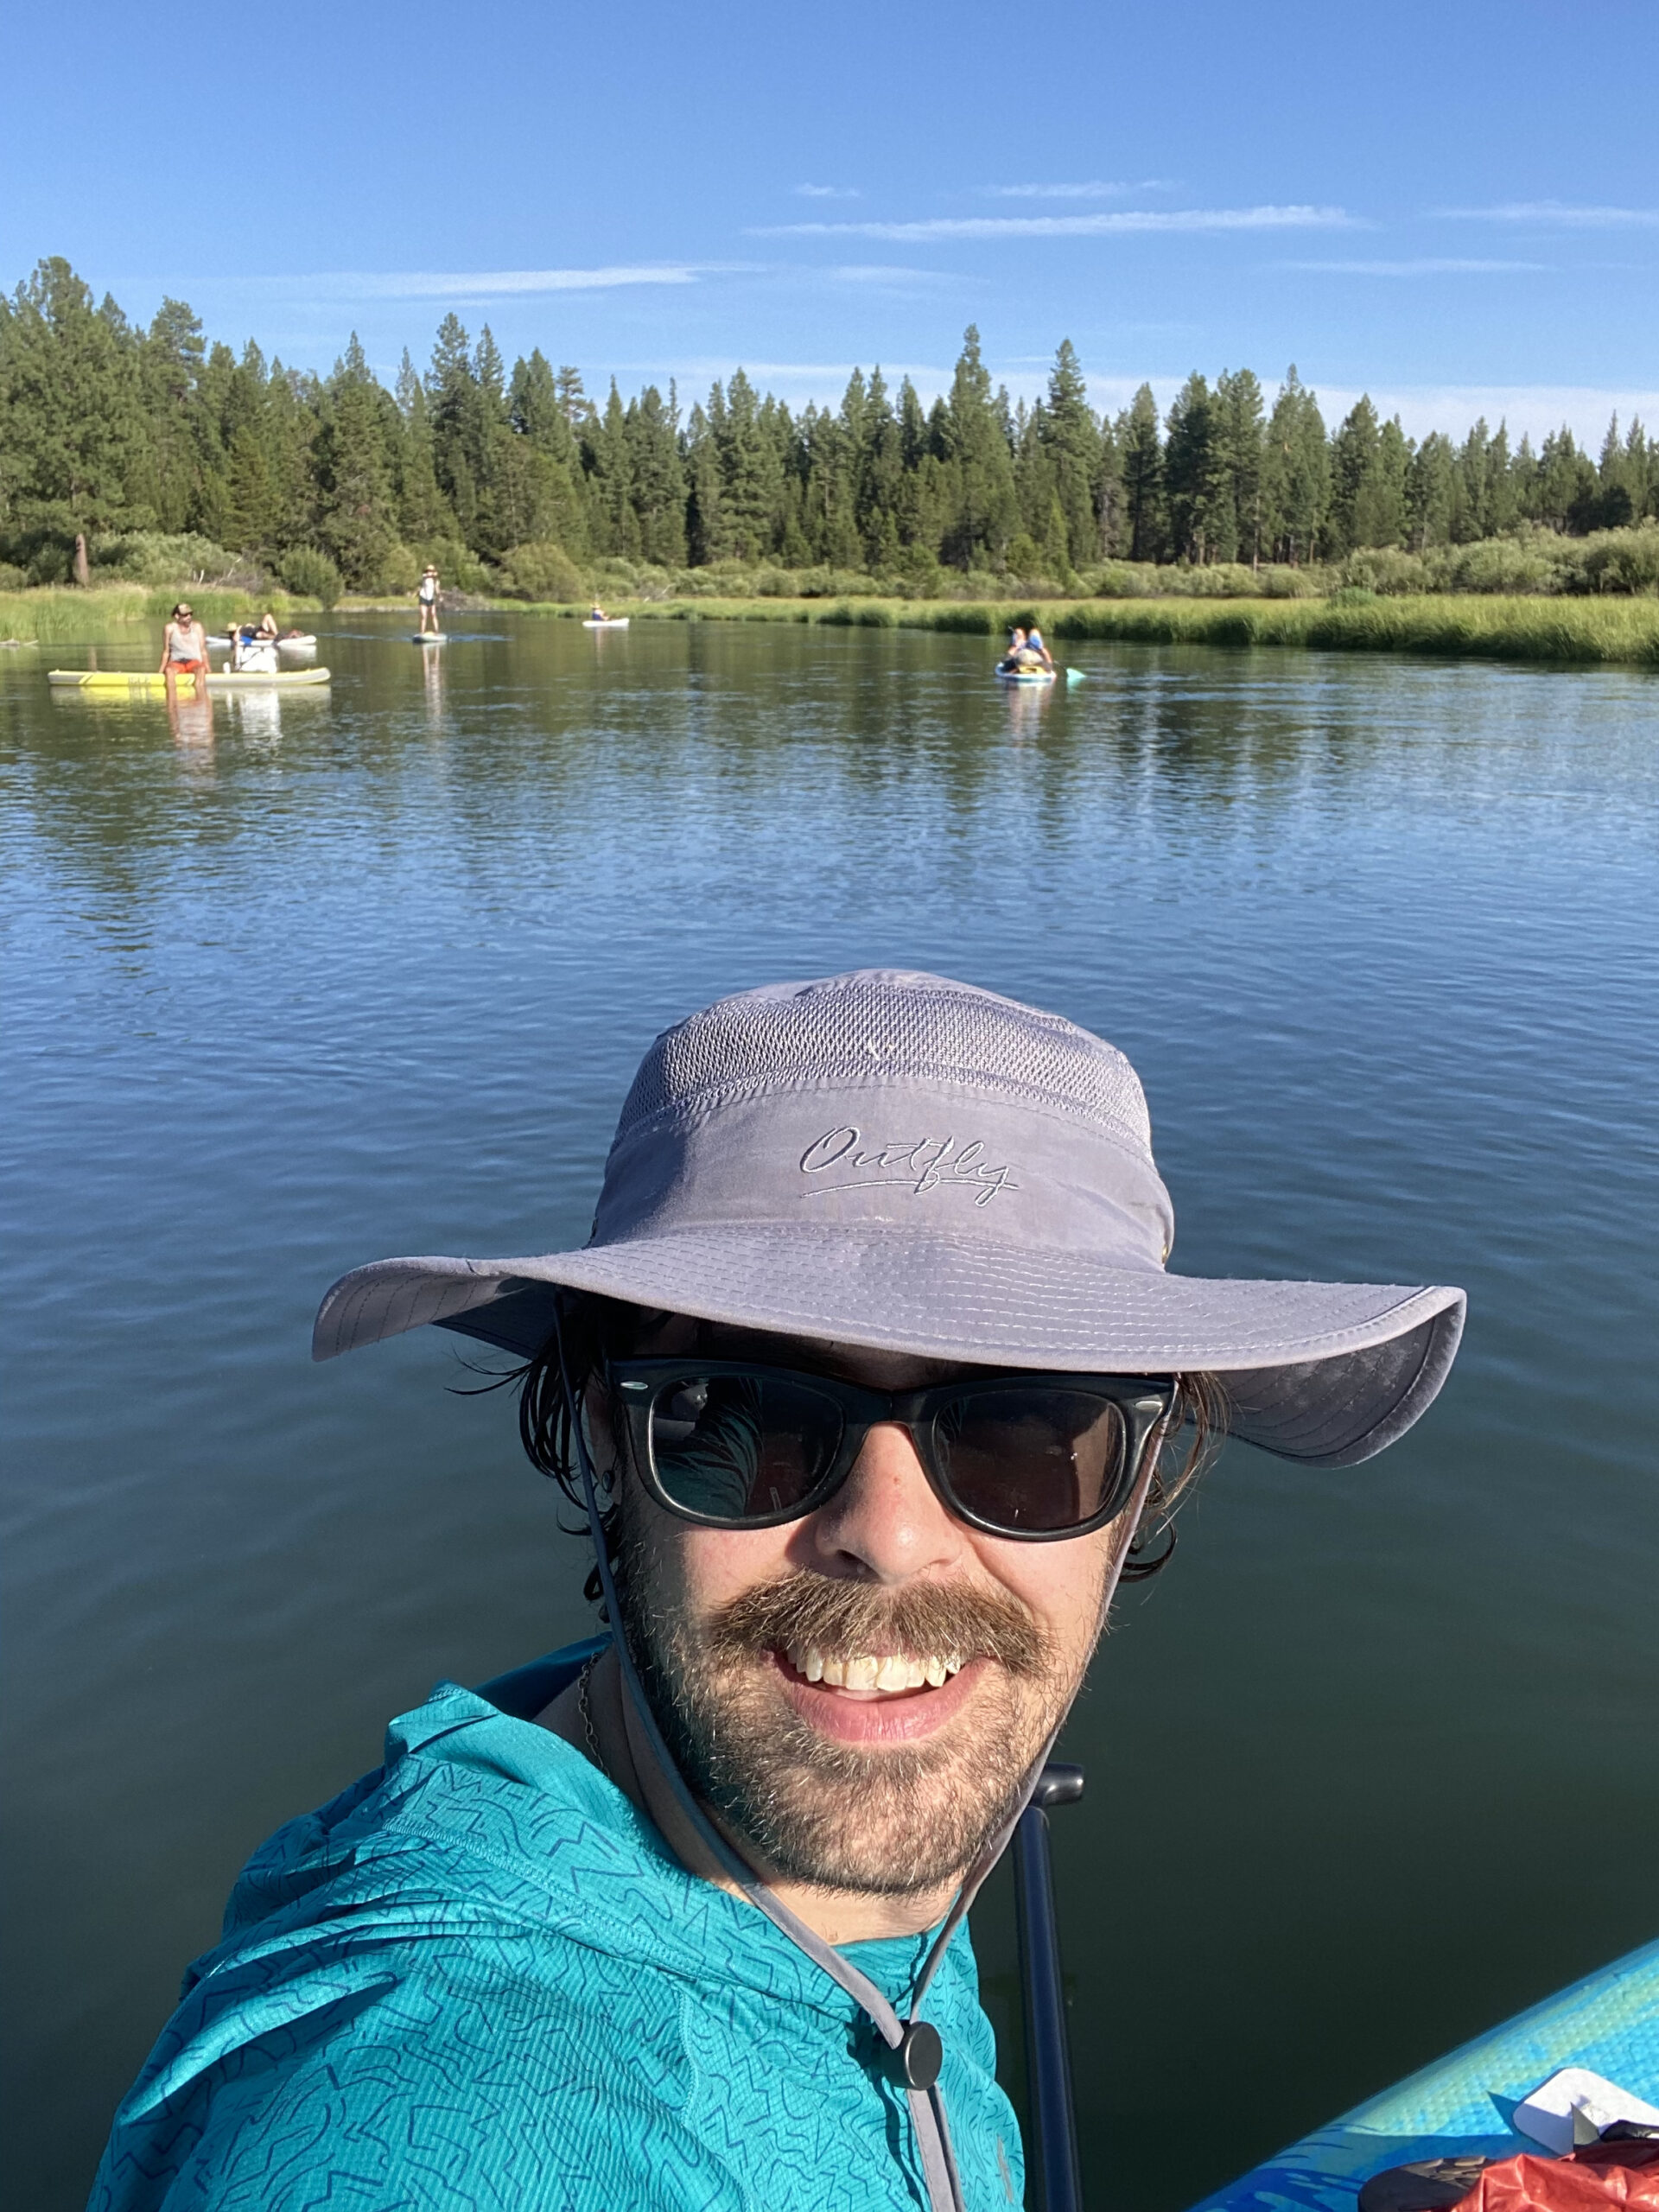 Adam Foster smiles broadly in a an outdoor photo in a kayak on a river